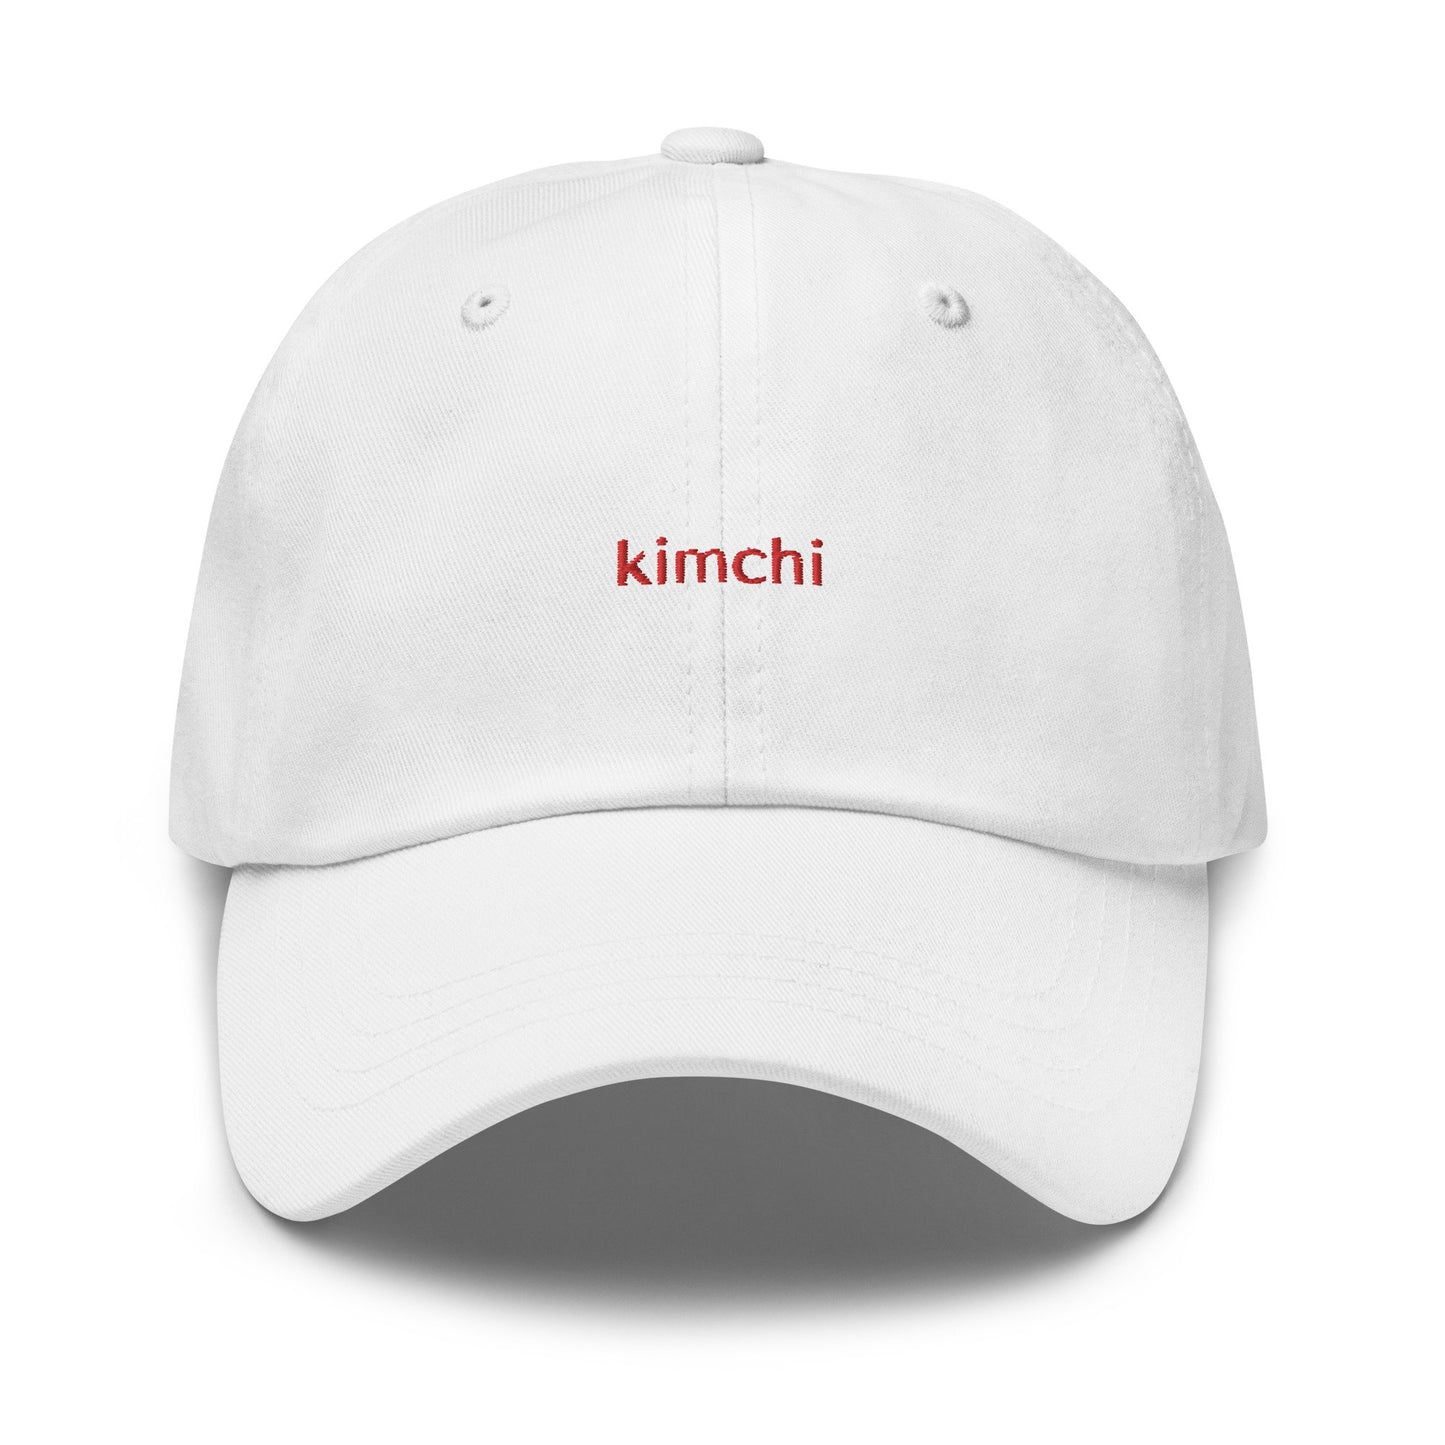 Kimchi Hat - Korean Food Gift - Multiple Colors - Cotton Embroidered Cap